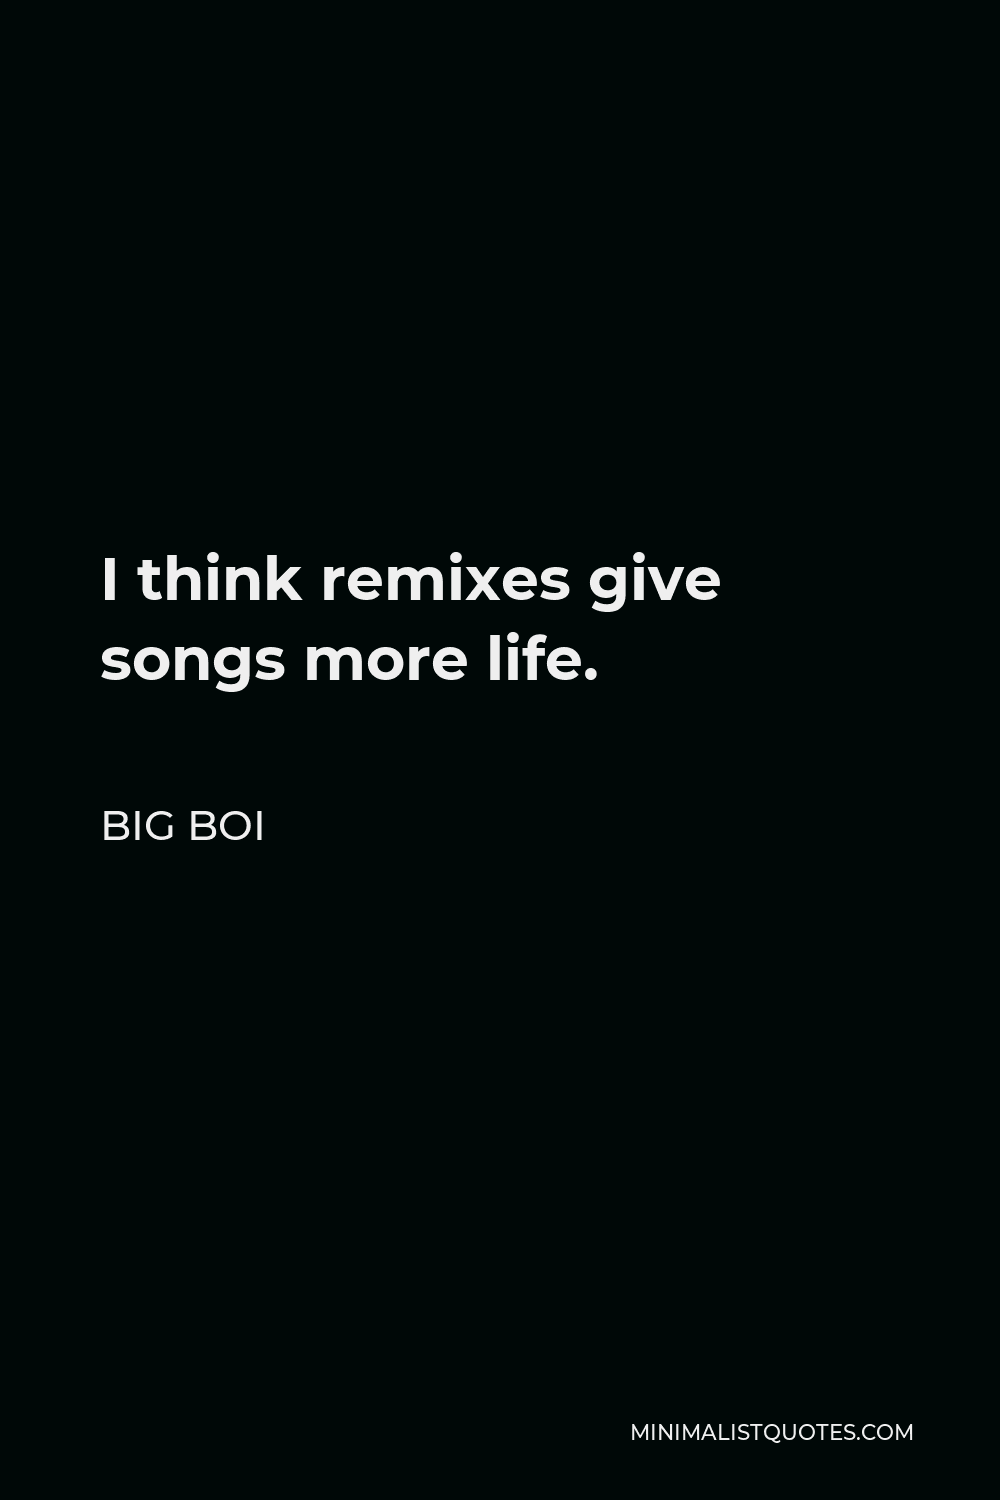 Big Boi Quote - I think remixes give songs more life.